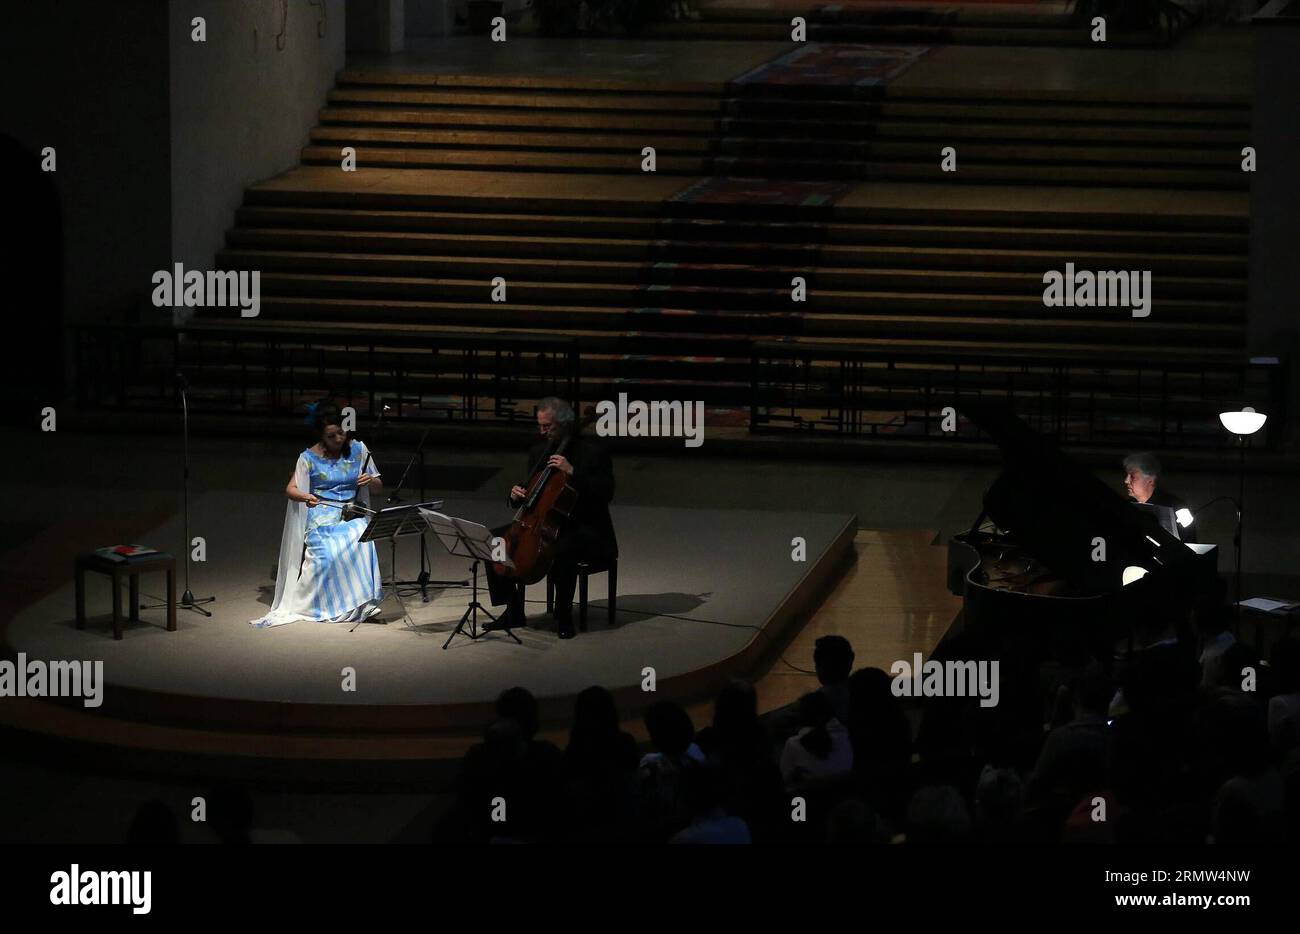 (141003) -- FRANKFURT, Oct. 3, 2014 -- Chinese musician Ma Xiaohui (L) performs Erhu, a two-stringed wooden instrument, with German violinist Daniel Robert Graf and German pianist Carl-Martin Buttgereit during a cencert held at a cathedral in Frankfurt, Germany, on Oct. 3, 2014. ) GERMANY-FRANKFURT-MA XIAOHUI-CONCERT LuoxHuanhuan PUBLICATIONxNOTxINxCHN   Frankfurt OCT 3 2014 Chinese Musician MA Xiaohui l performs Erhu a Two stringed Wooden Instrument With German Violinist Daniel Robert Graf and German Pianist Carl Martin Buttgereit during a  Hero AT a Cathedral in Frankfurt Germany ON OCT 3 20 Stock Photo